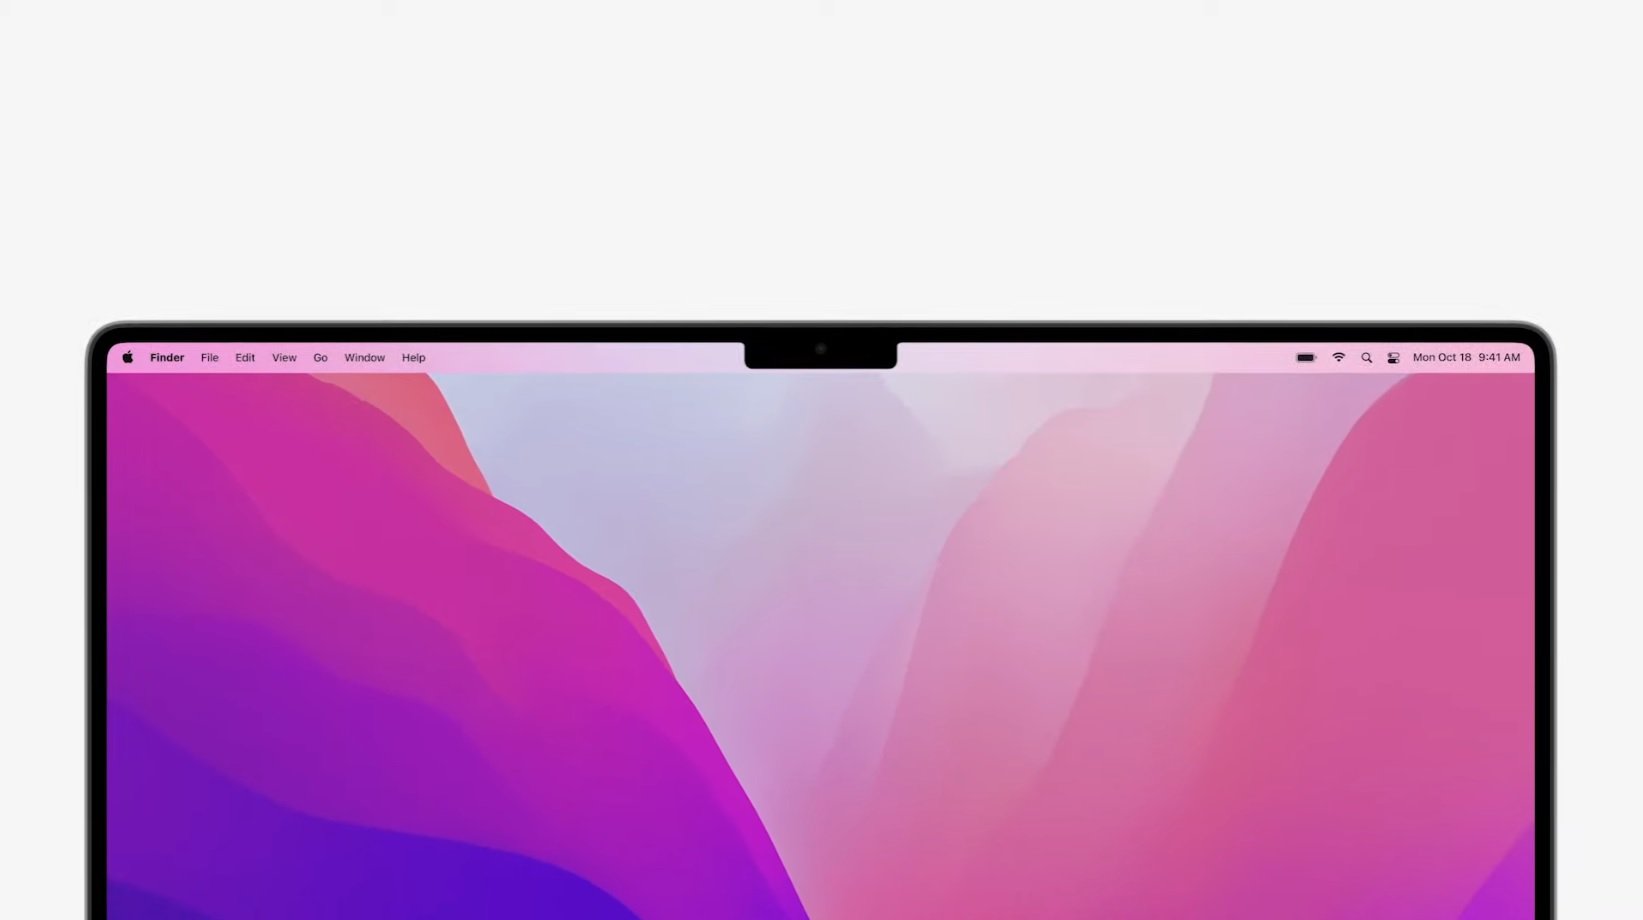 An image of the notch and webcam on the 2021-inch MacBook Pro (16) from the Apple Unleashed event